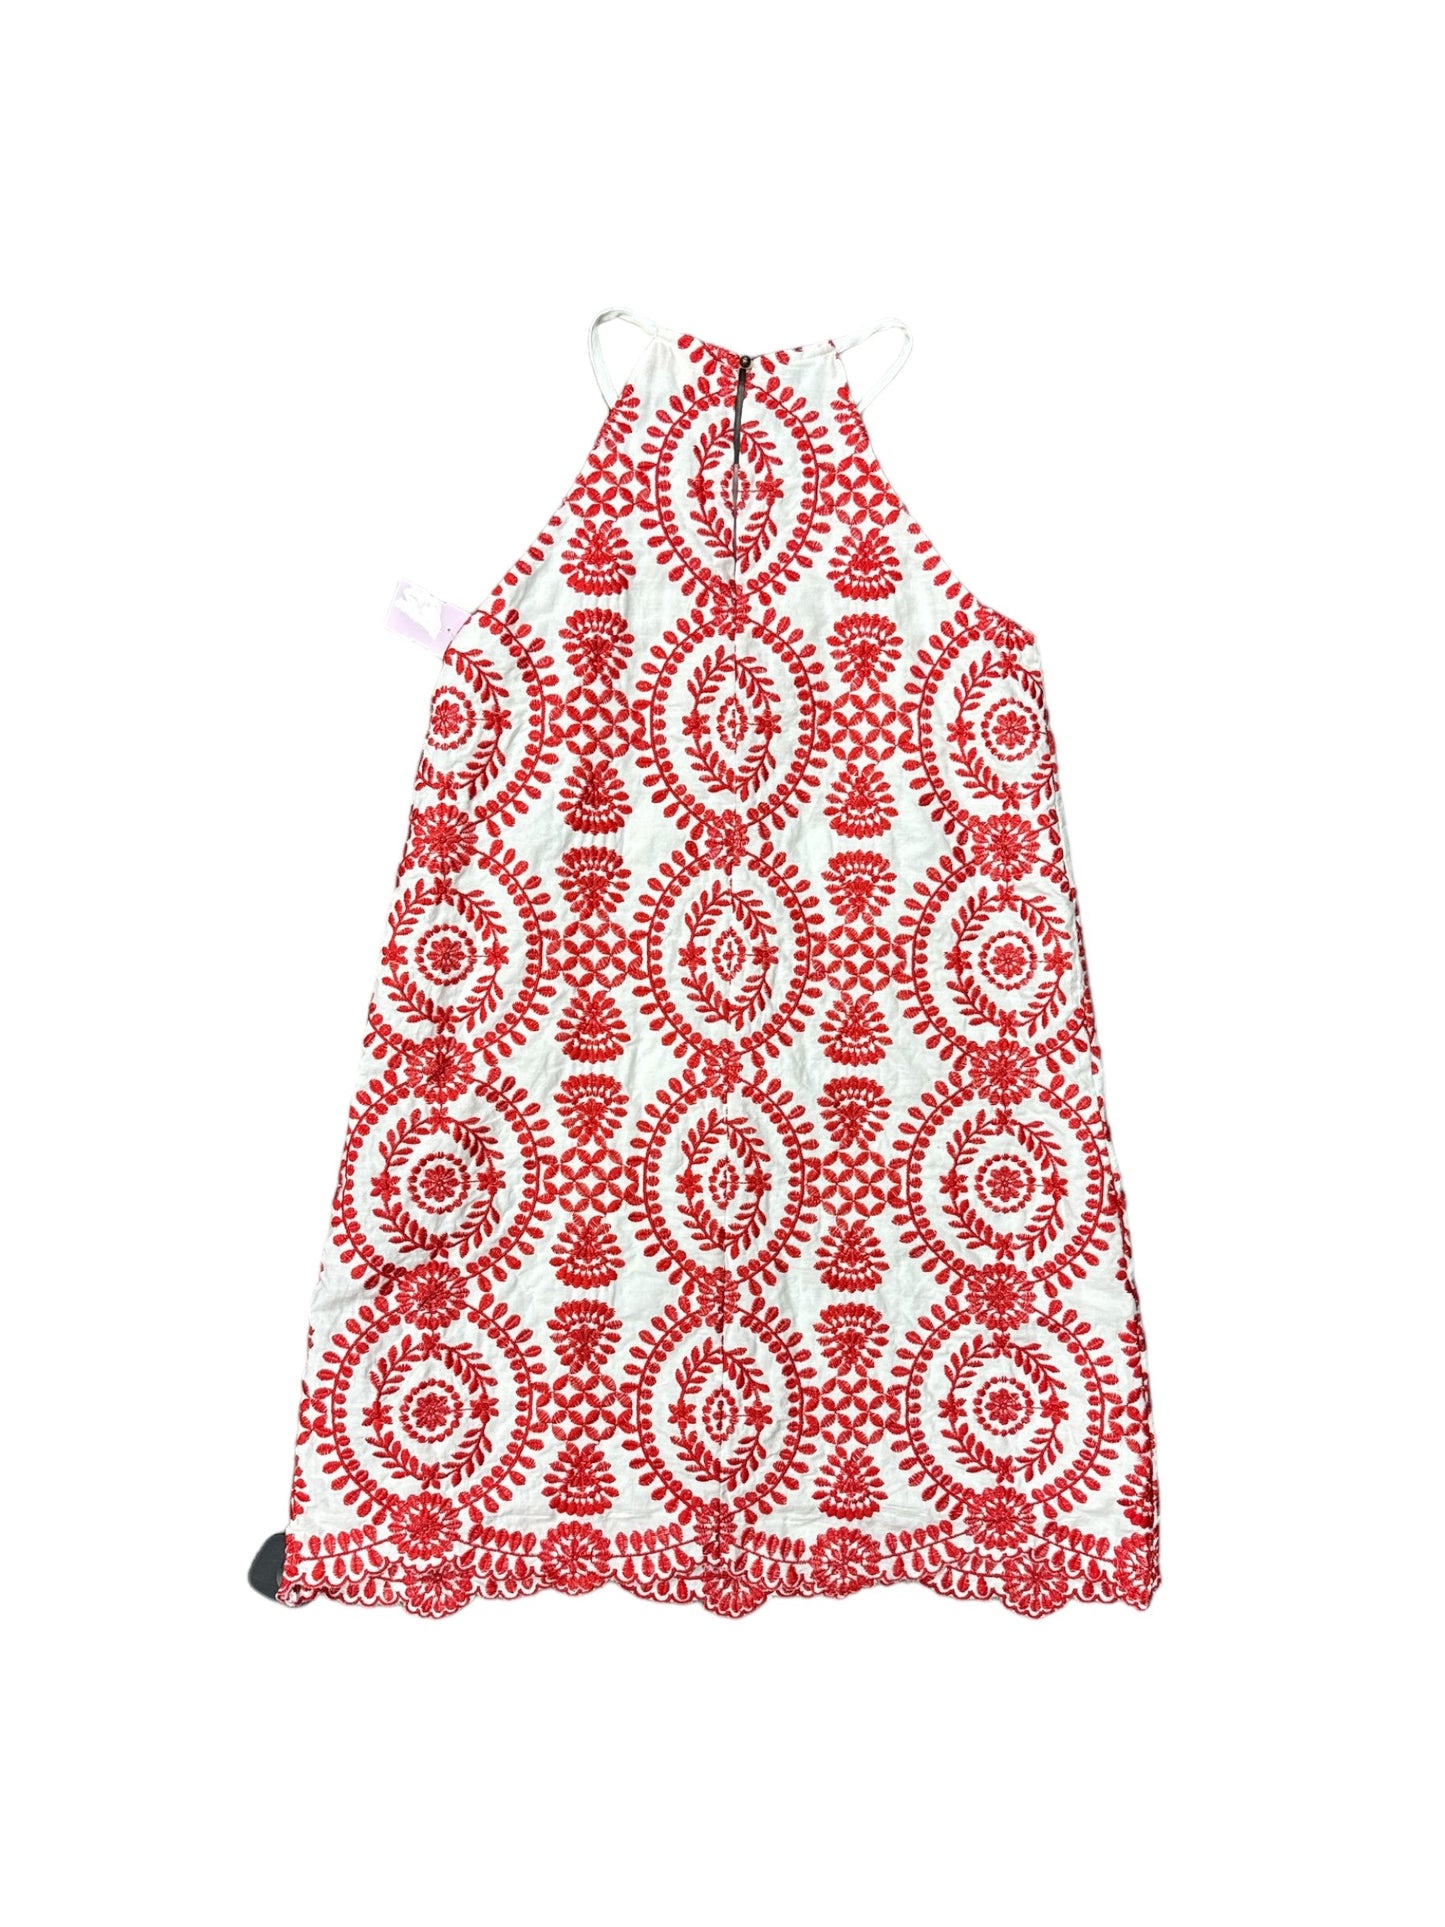 Red & White Dress Casual Short Entro, Size 4